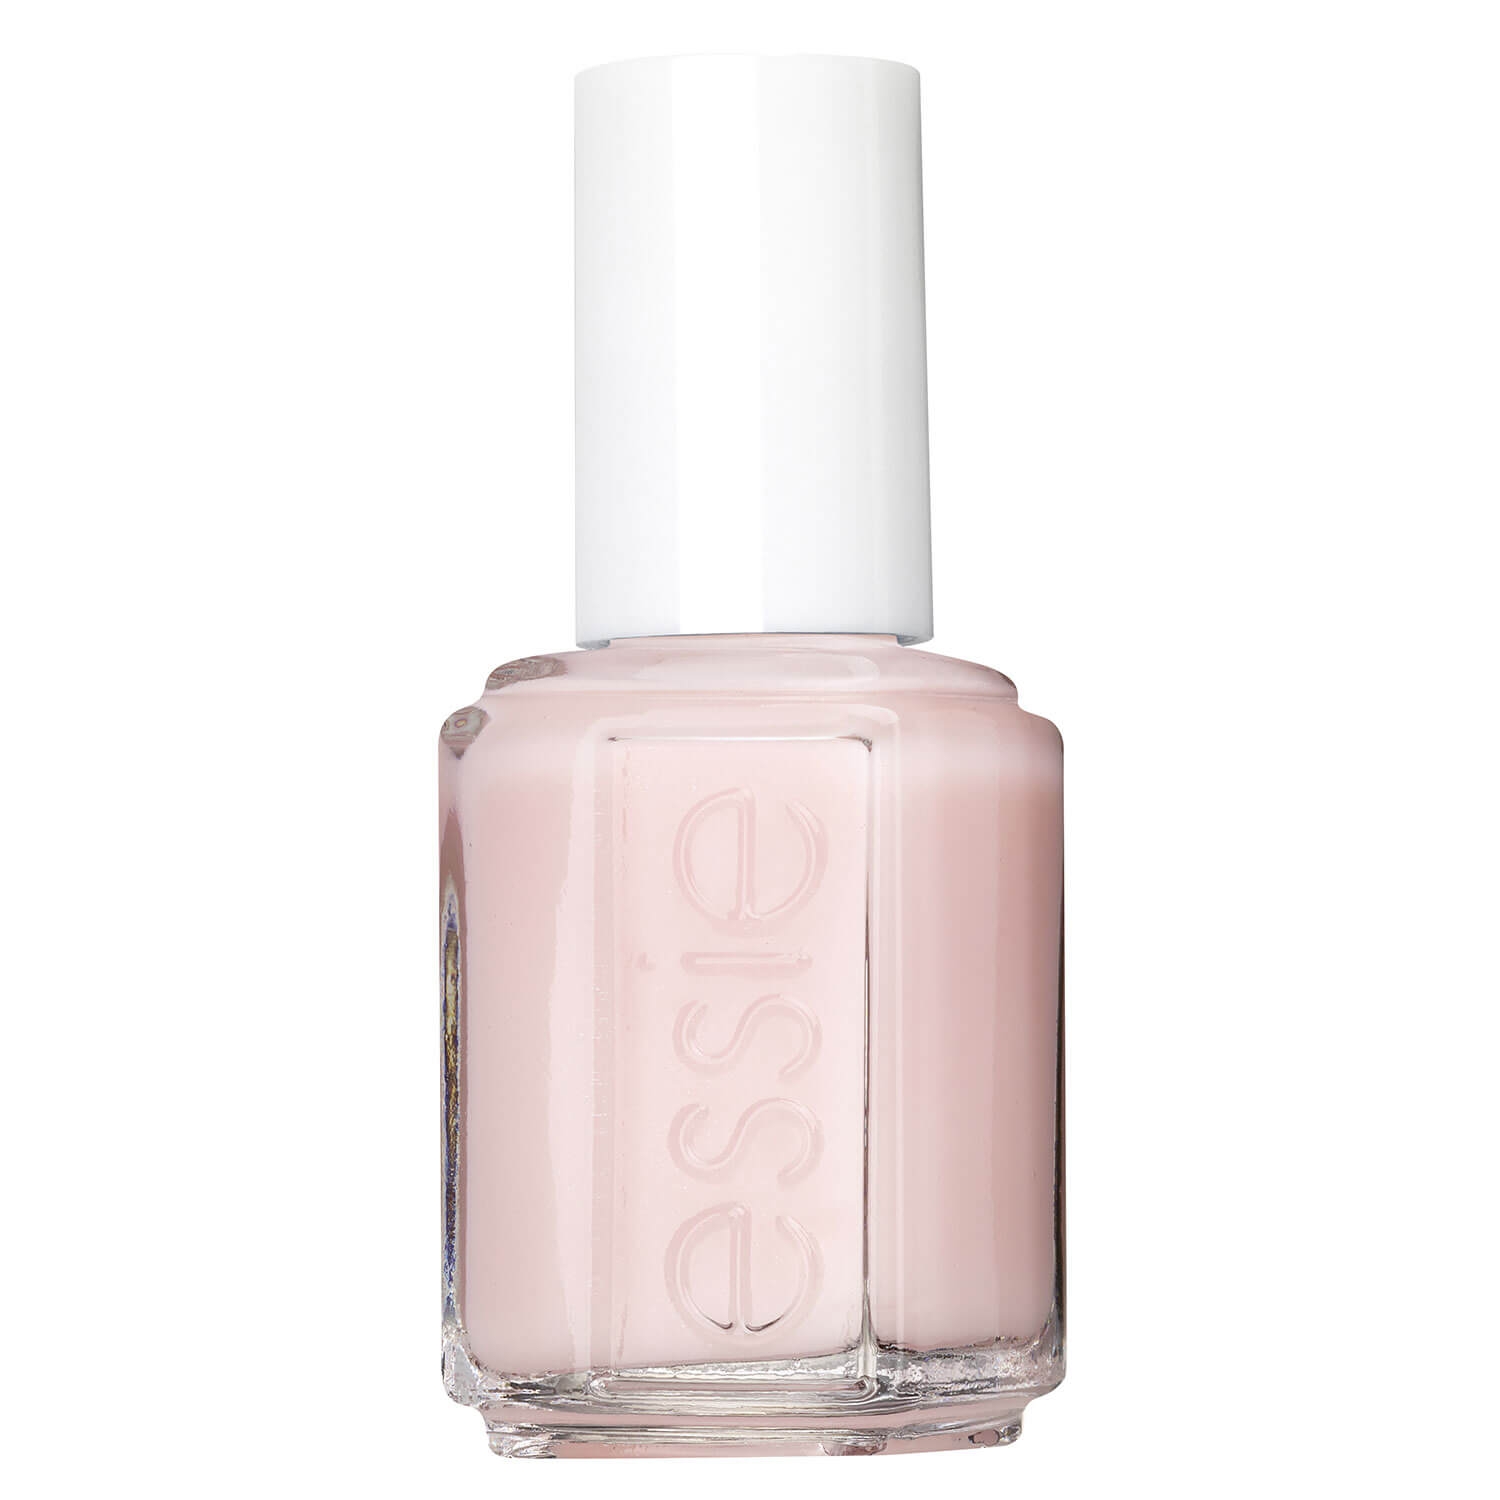 Product image from essie nail polish - vanity fairest 9